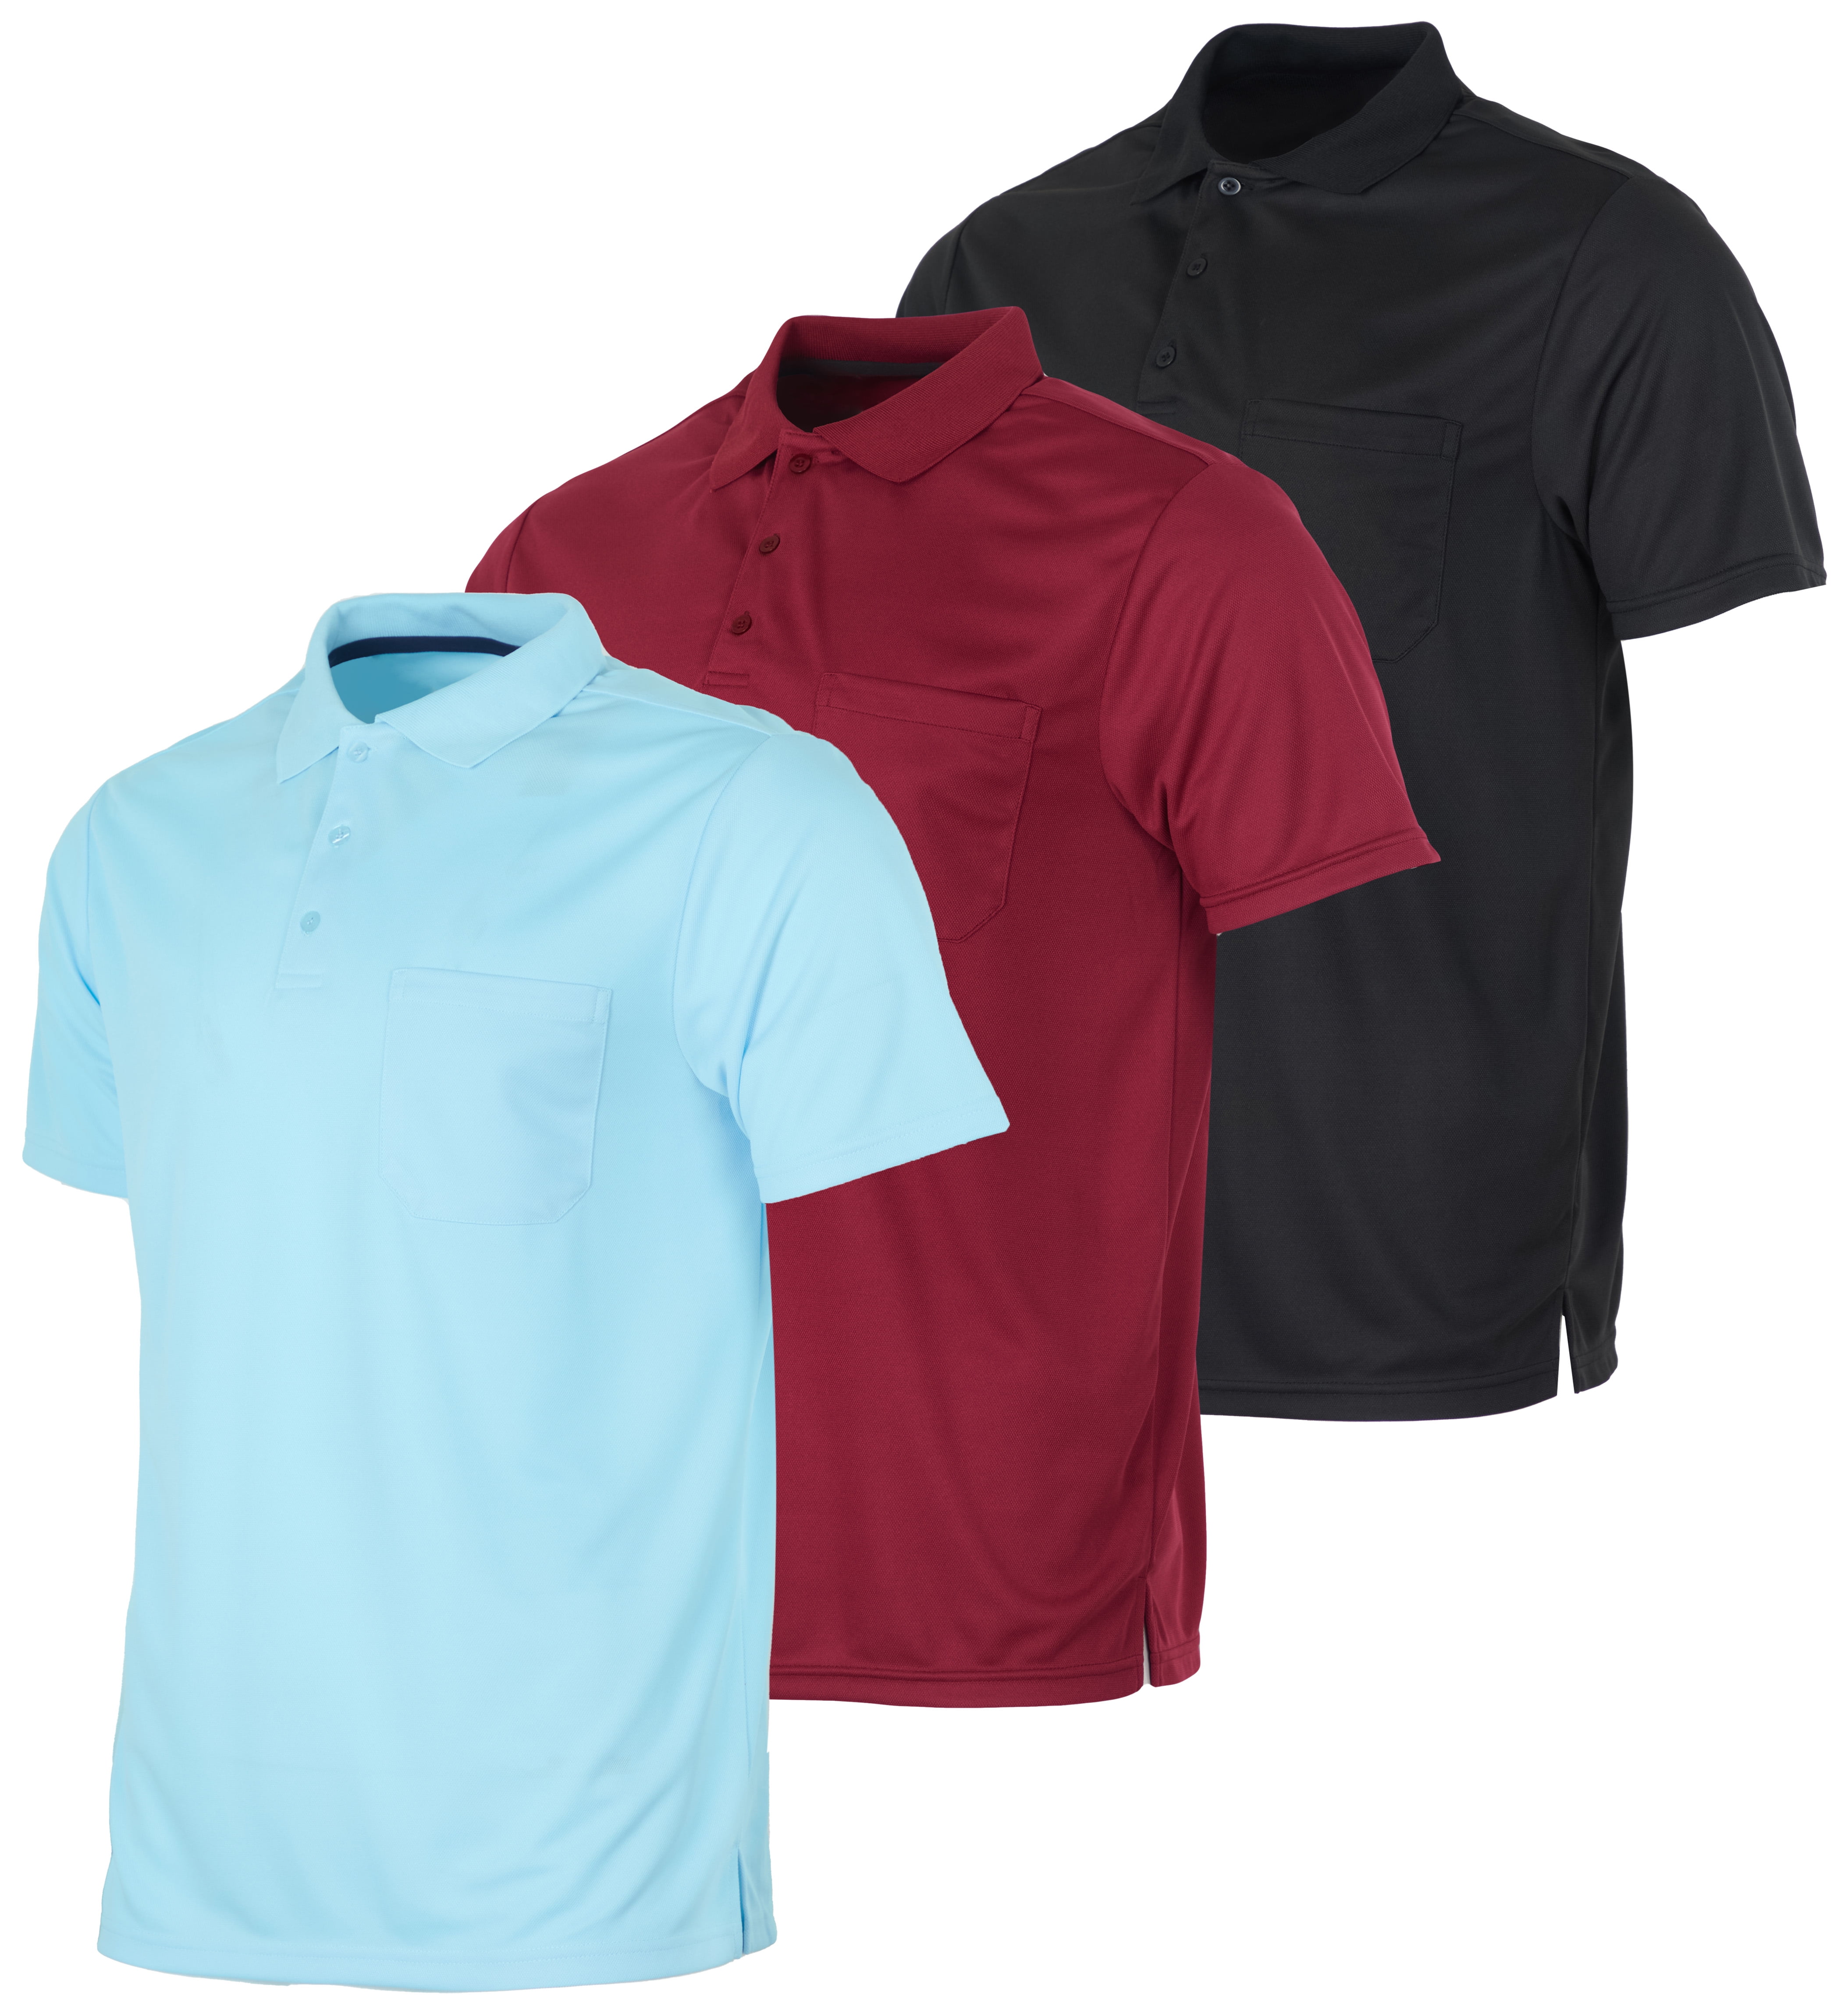 Real Essentials 3 Pack: Mens Short Sleeve Dry-Fit Collared Polo Shirt ...